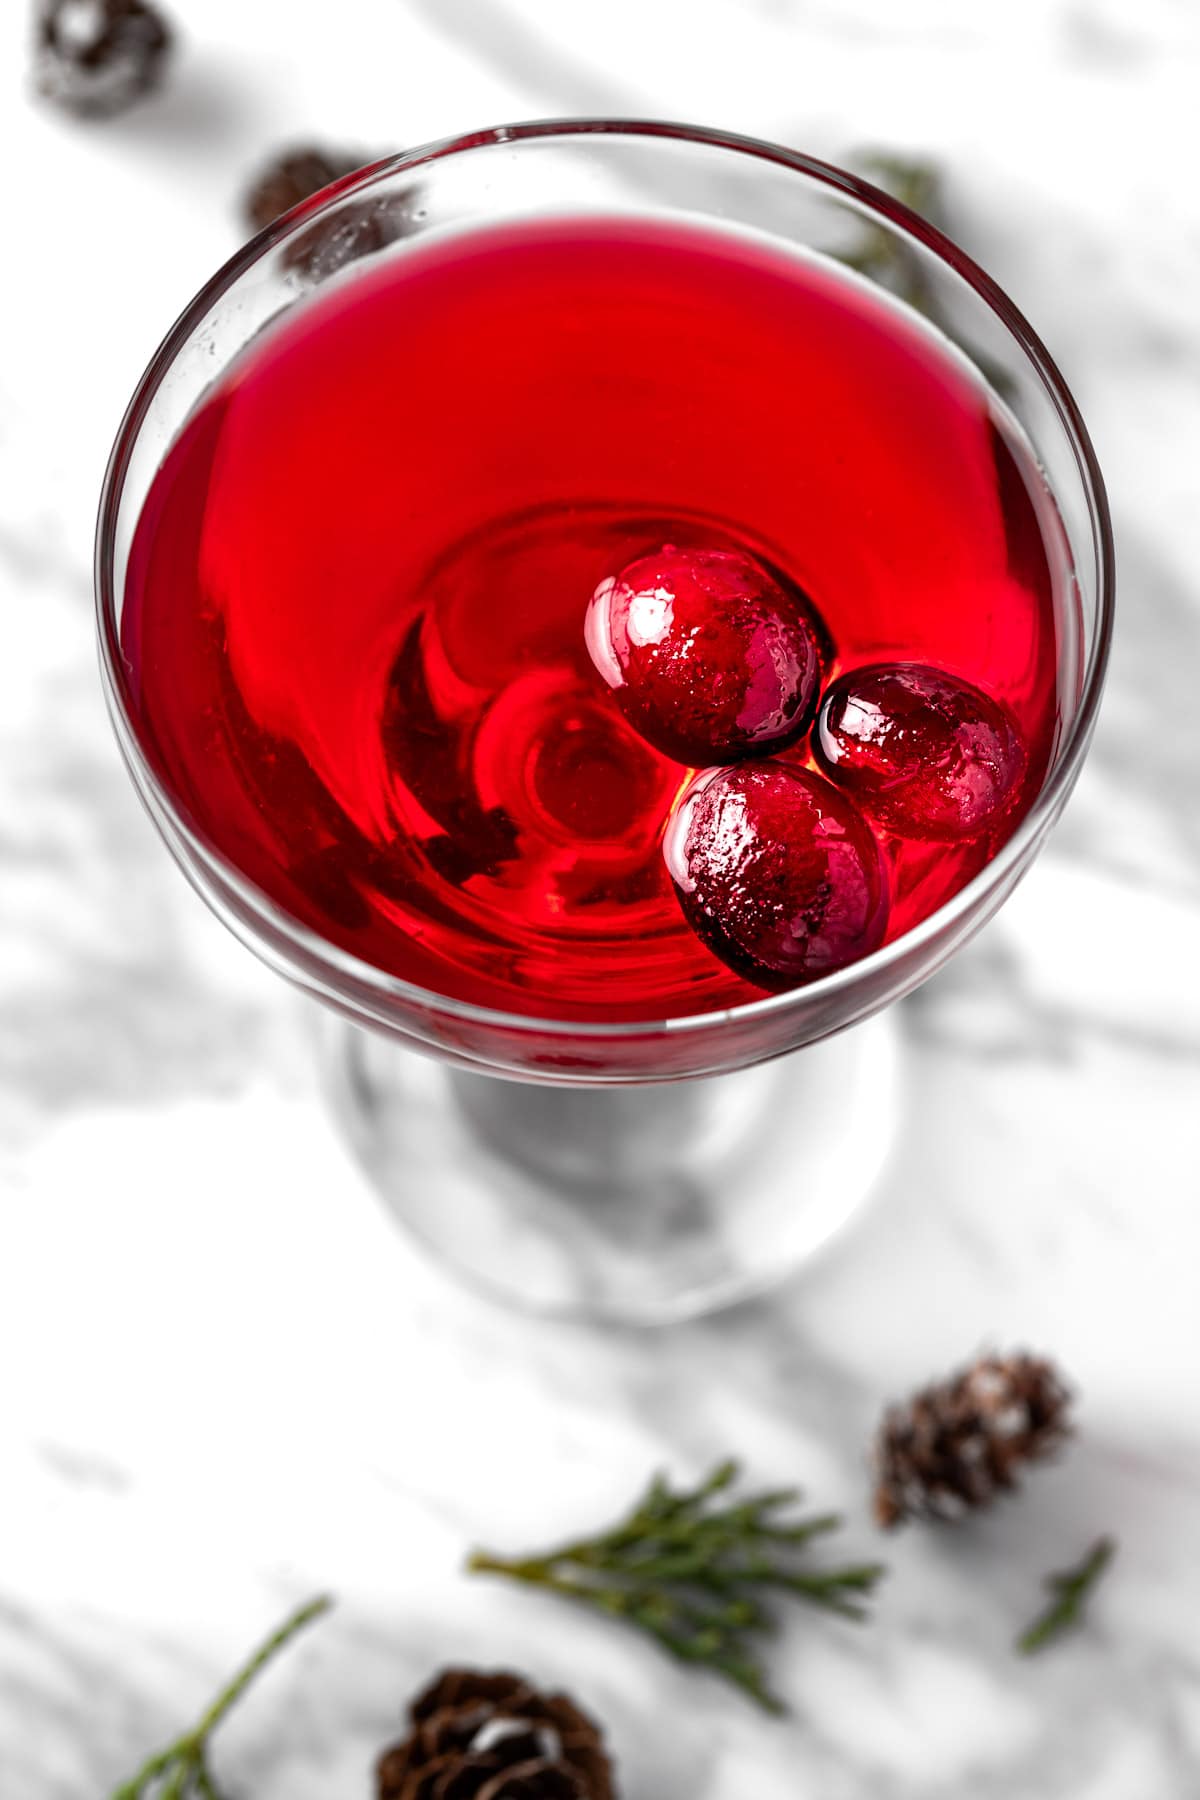 A cranberry gimlet garnished with 3 cranberries.